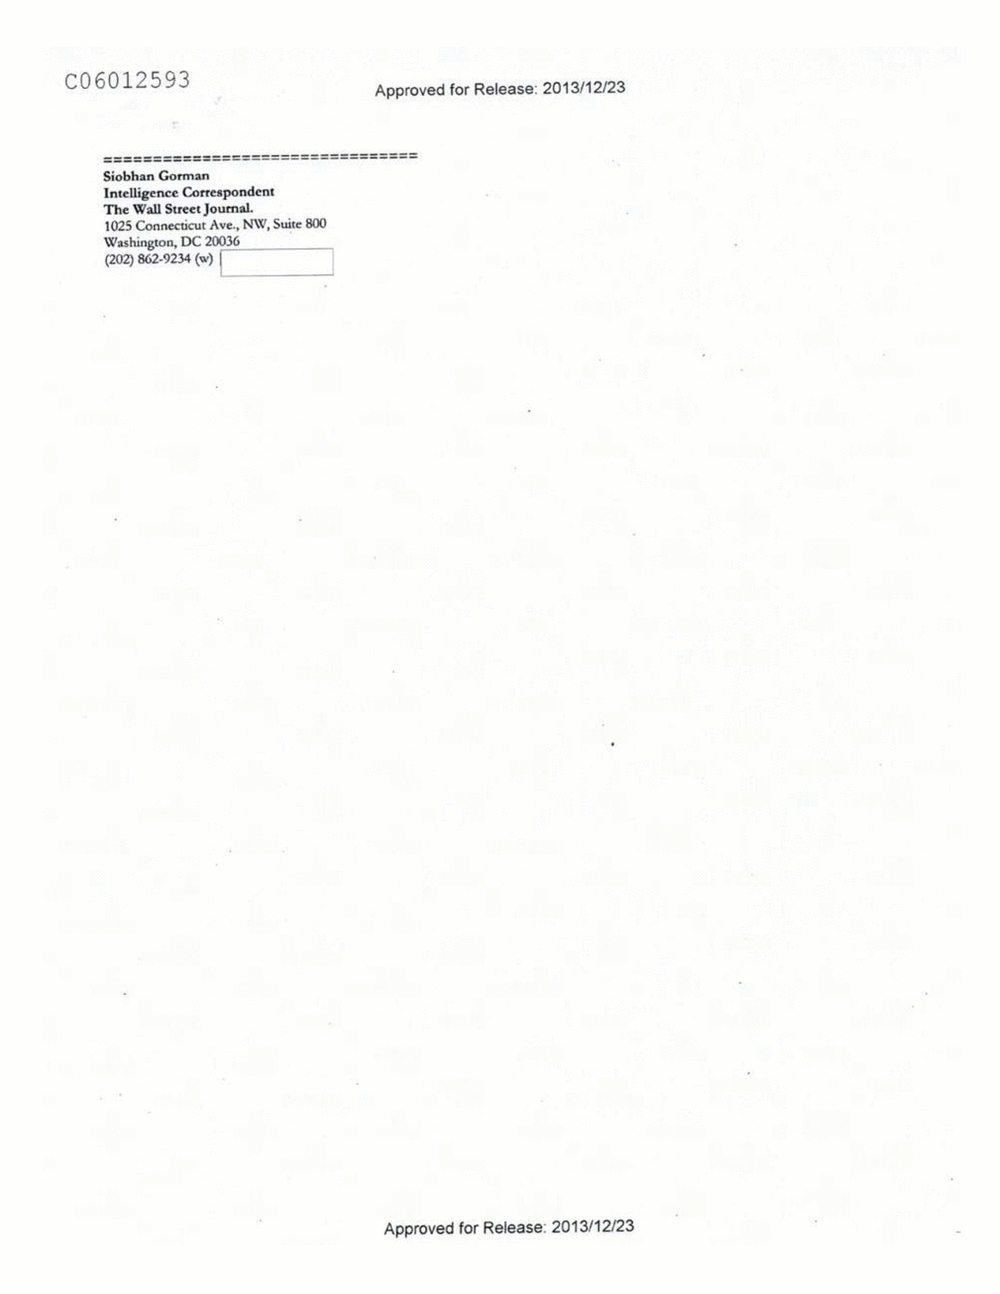 Page 149 from Email Correspondence Between Reporters and CIA Flacks